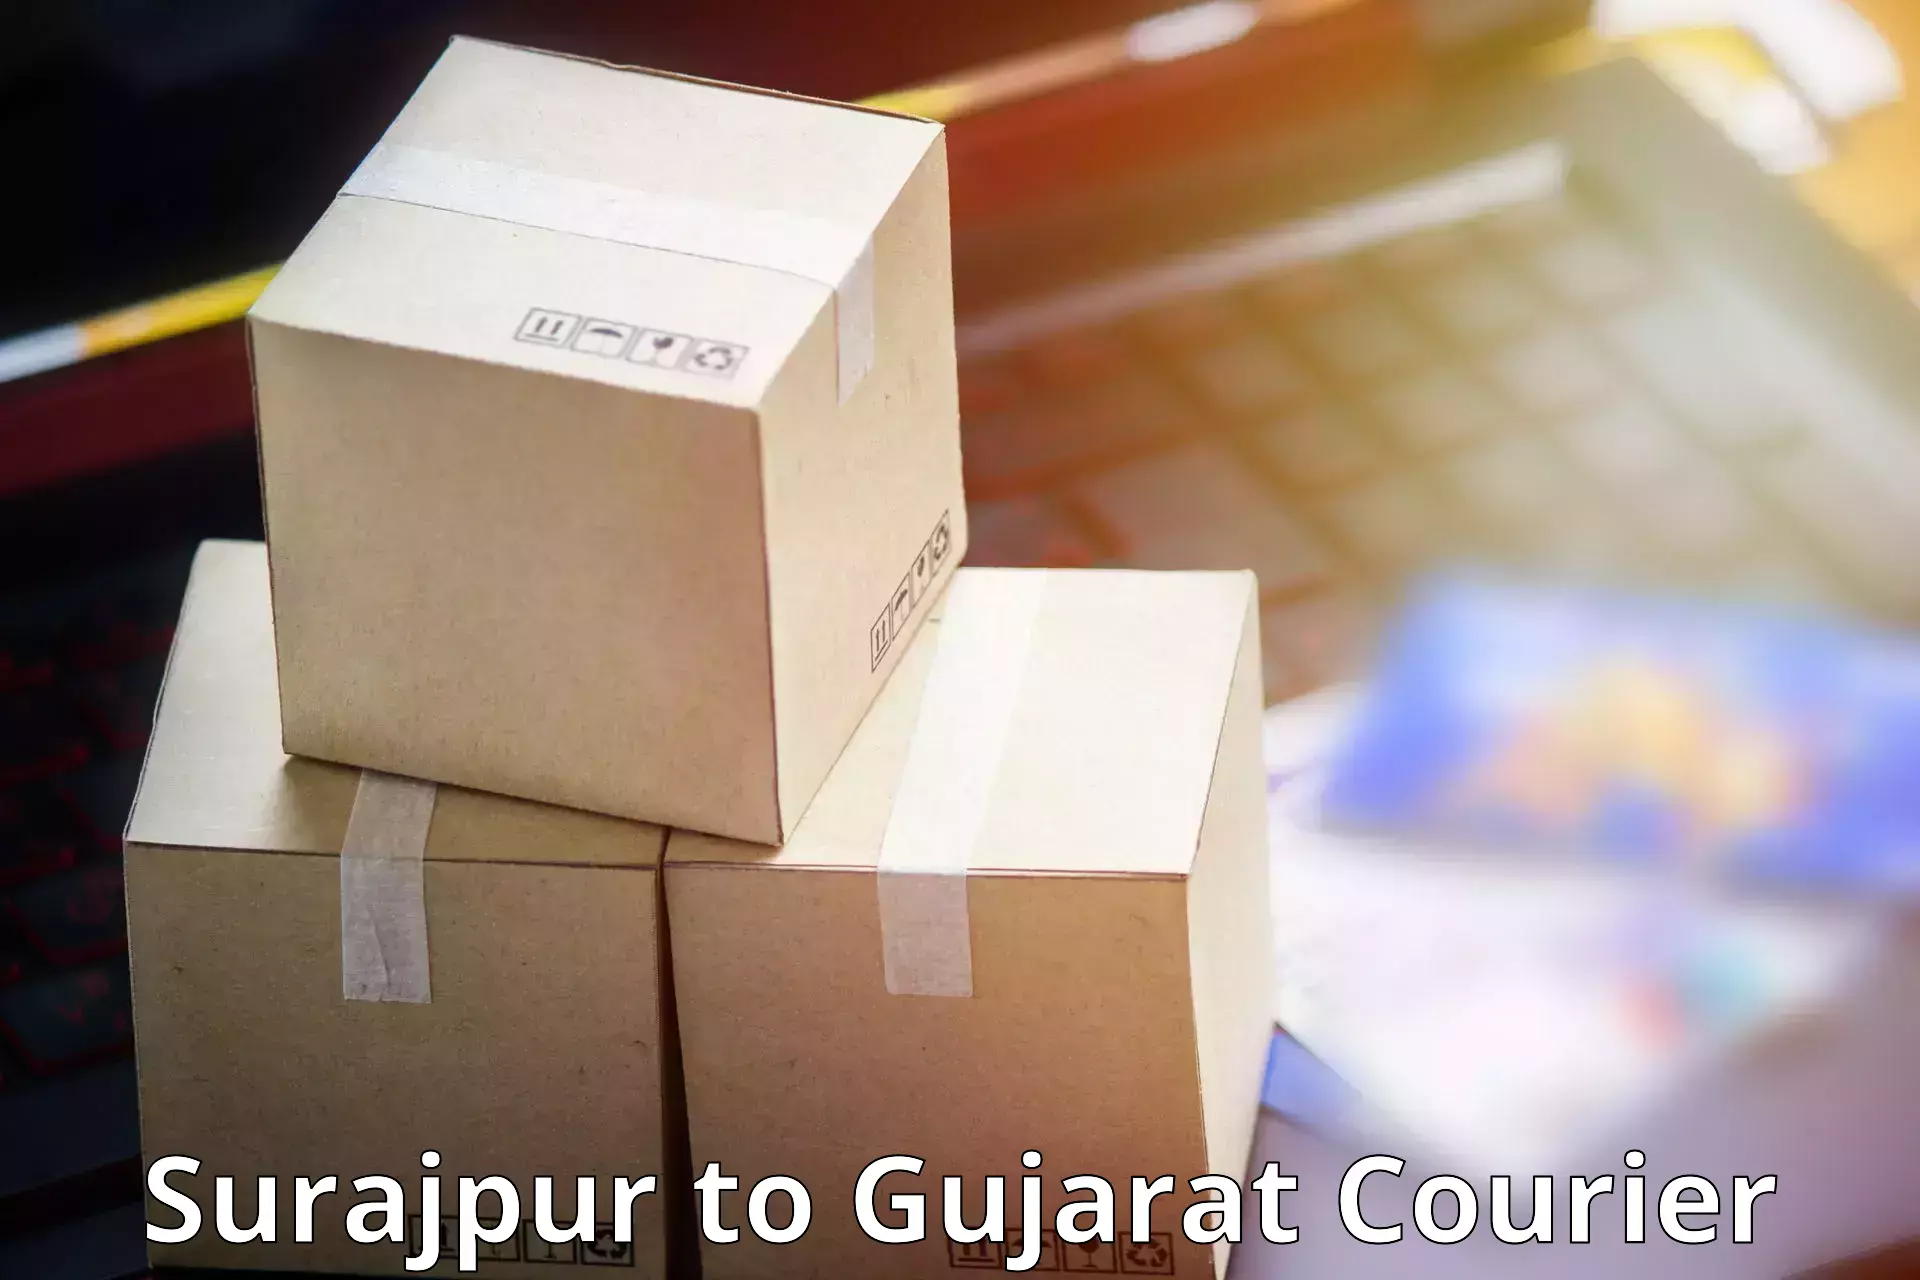 Reliable logistics providers Surajpur to Ankleshwar